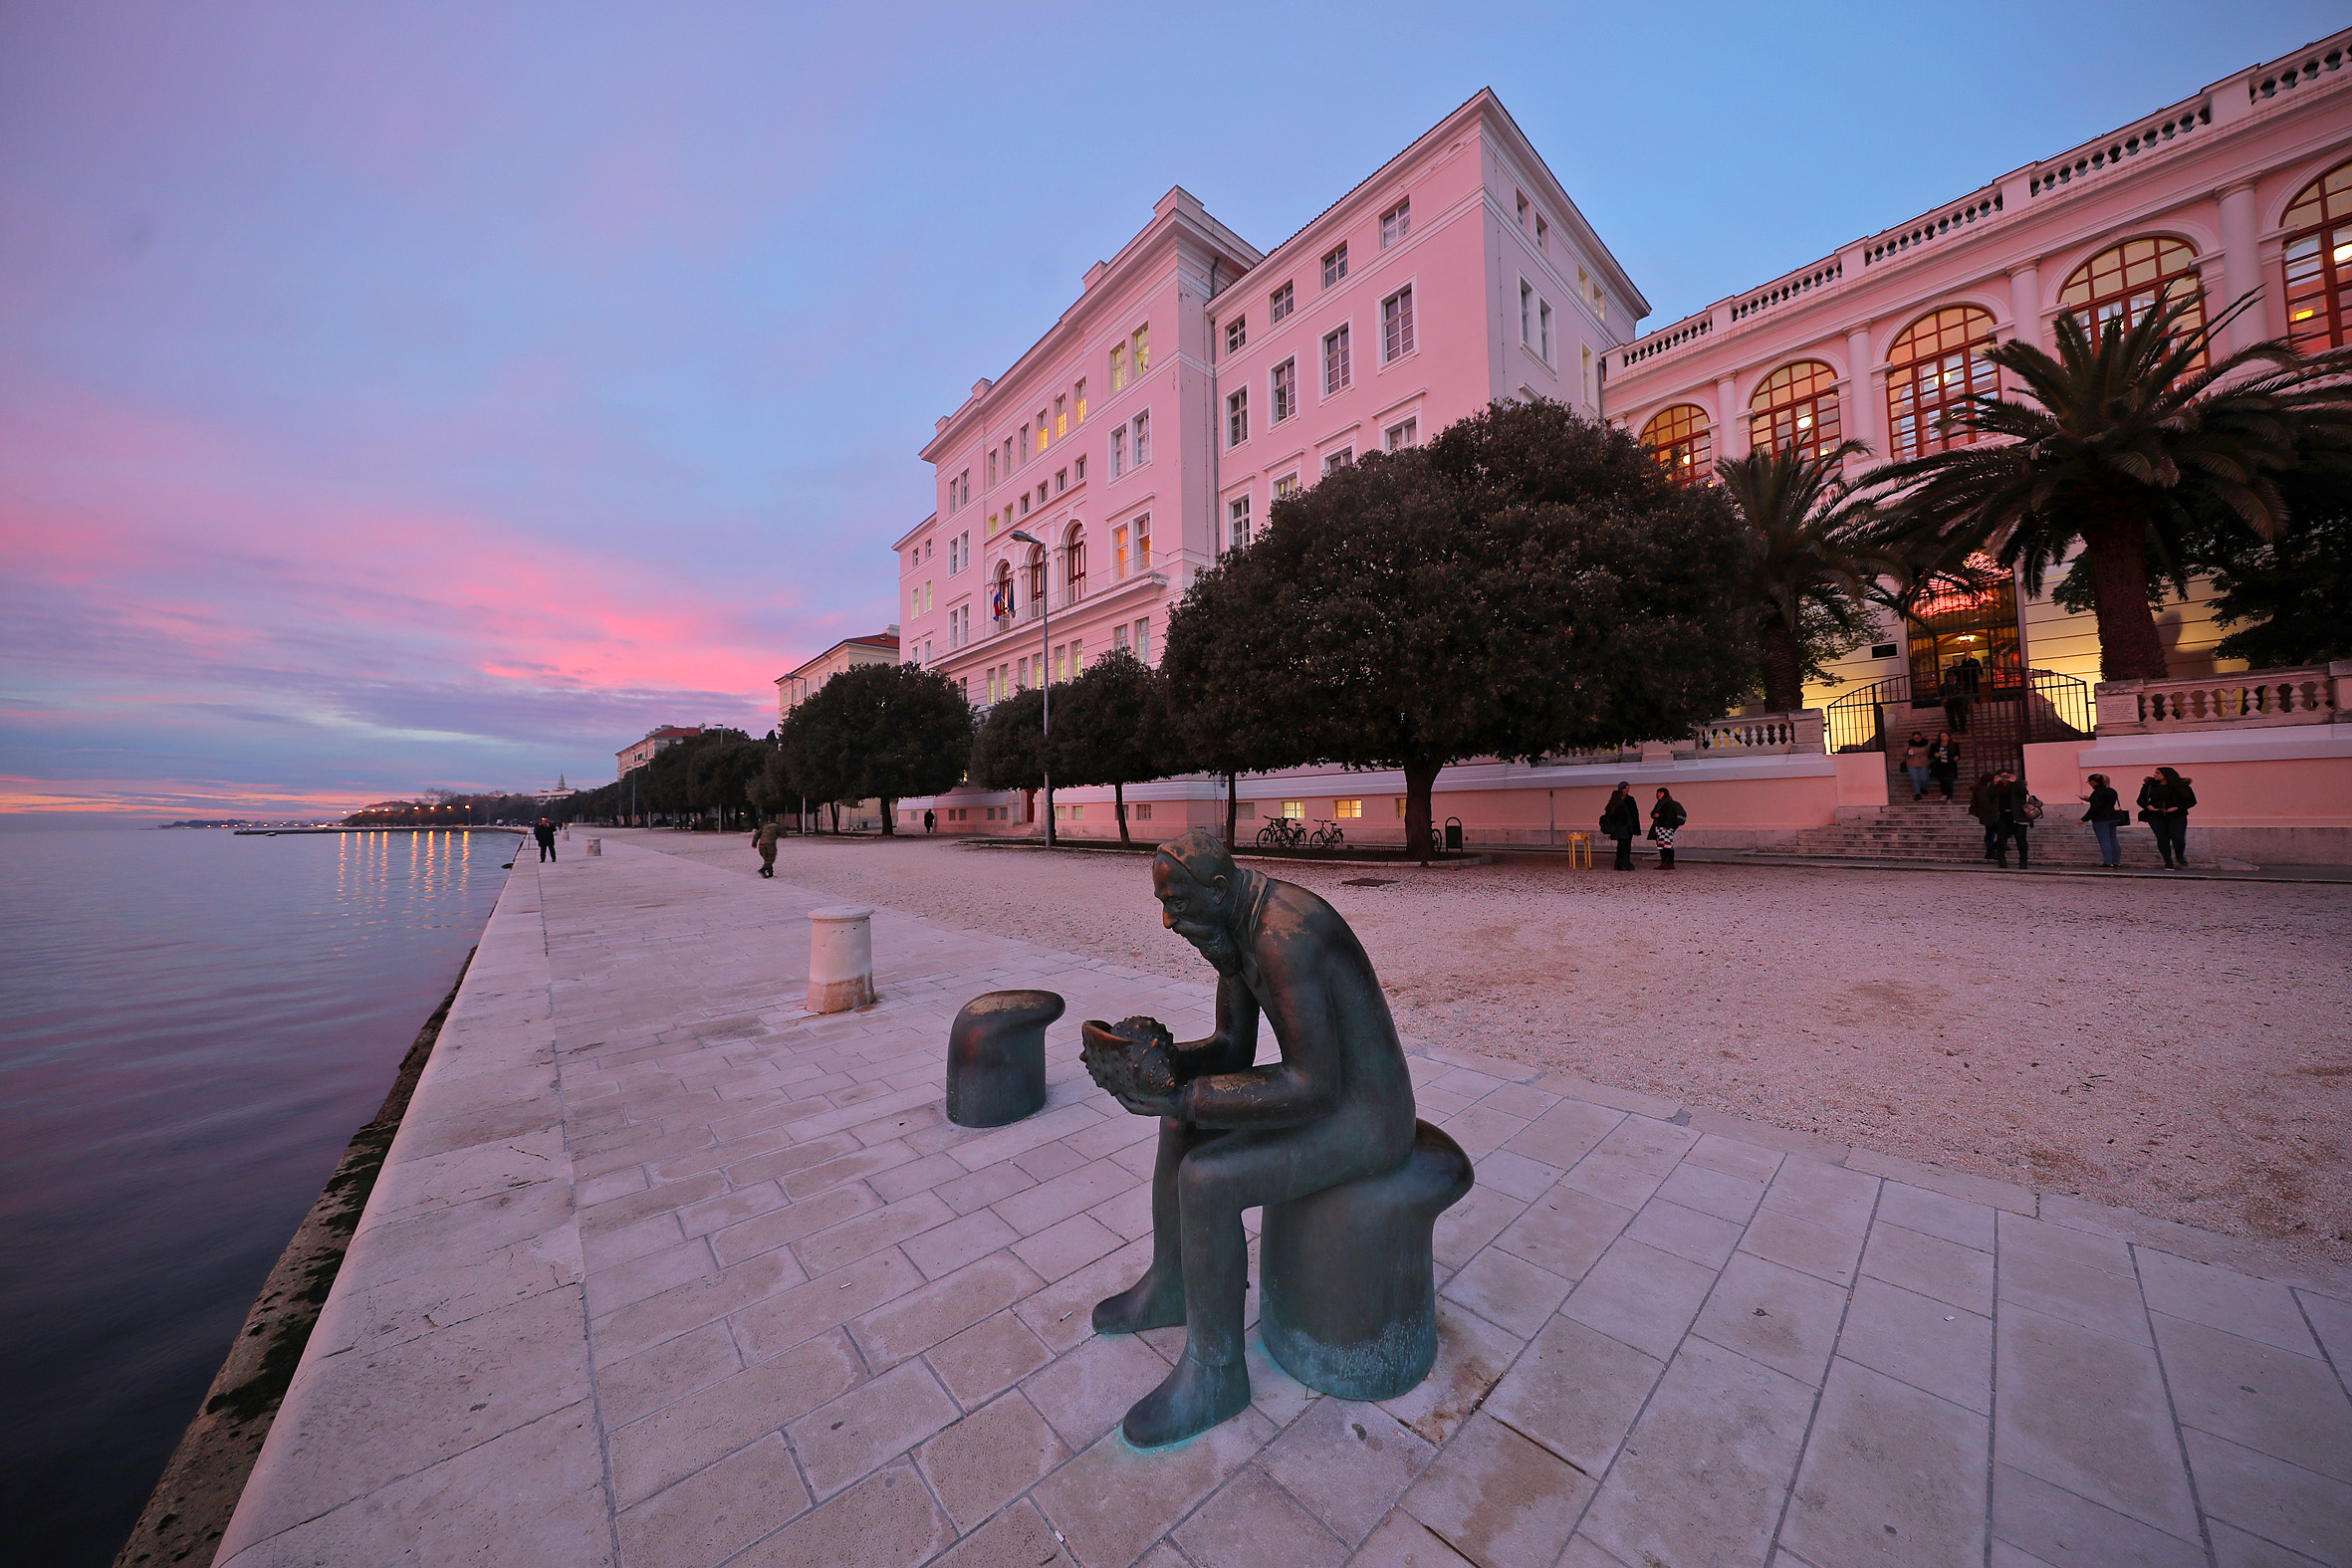 In the foreground, a sculpture of a man sitting down and llooking into a large sea shell. In the background, the University of Zadar at sunset